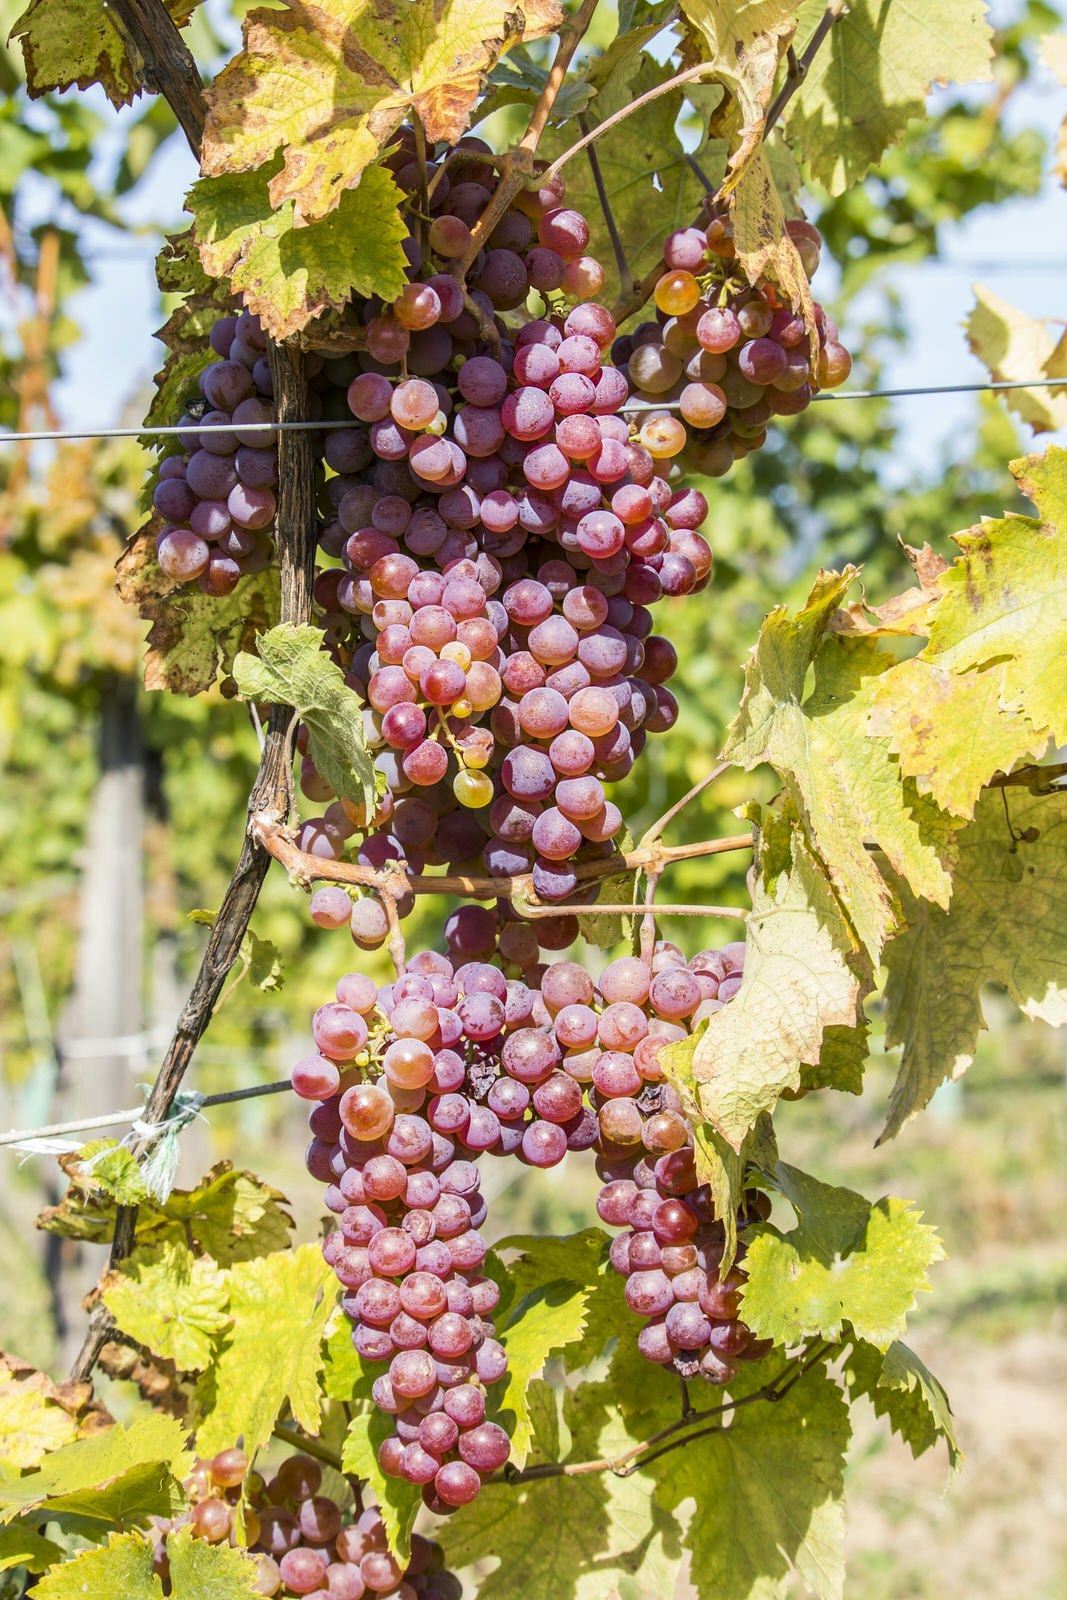 Red grapes waiting to be picked at a winery